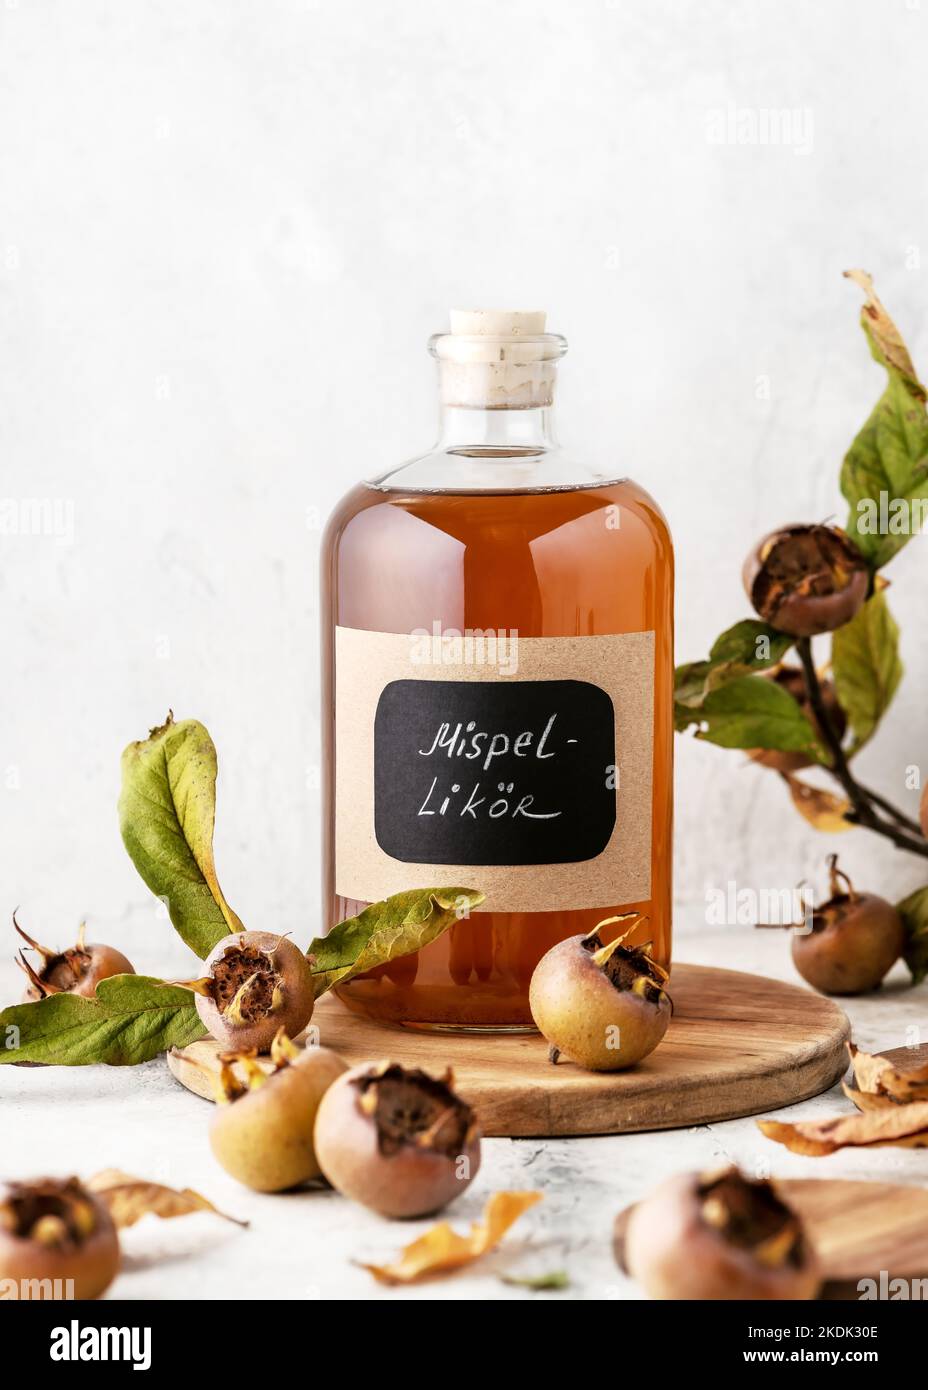 Glass bottle of aromatic homemade medlar fruit liquor with German text 'Mispel likör'on it. Alcohol drink concept. (Mespilus germanica) Stock Photo